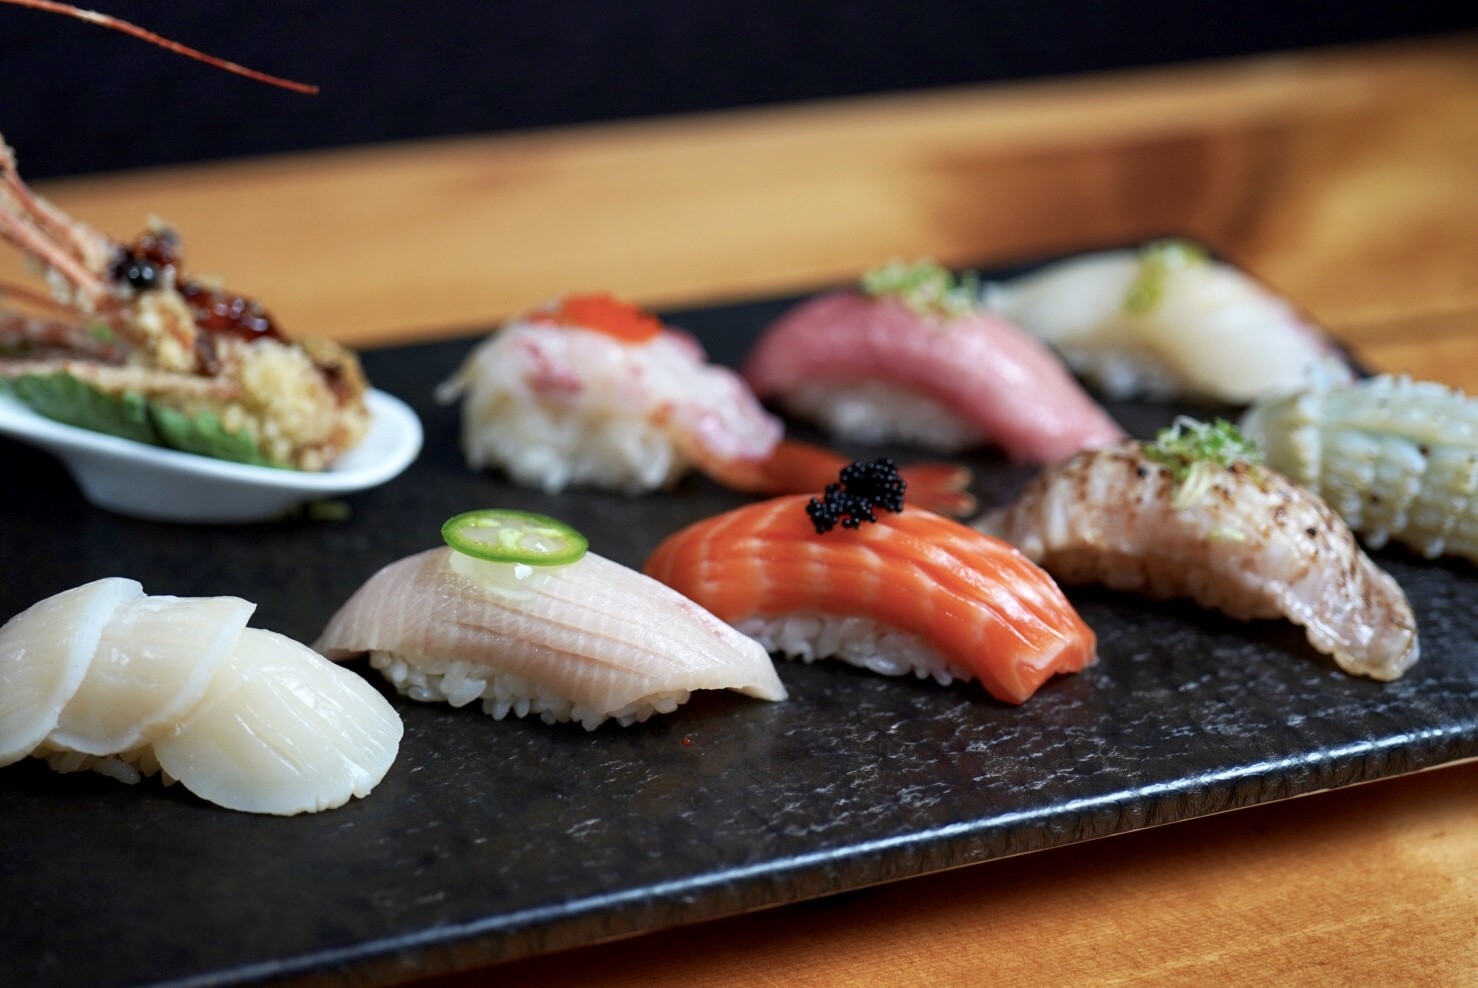 A plate of different types of sushi.